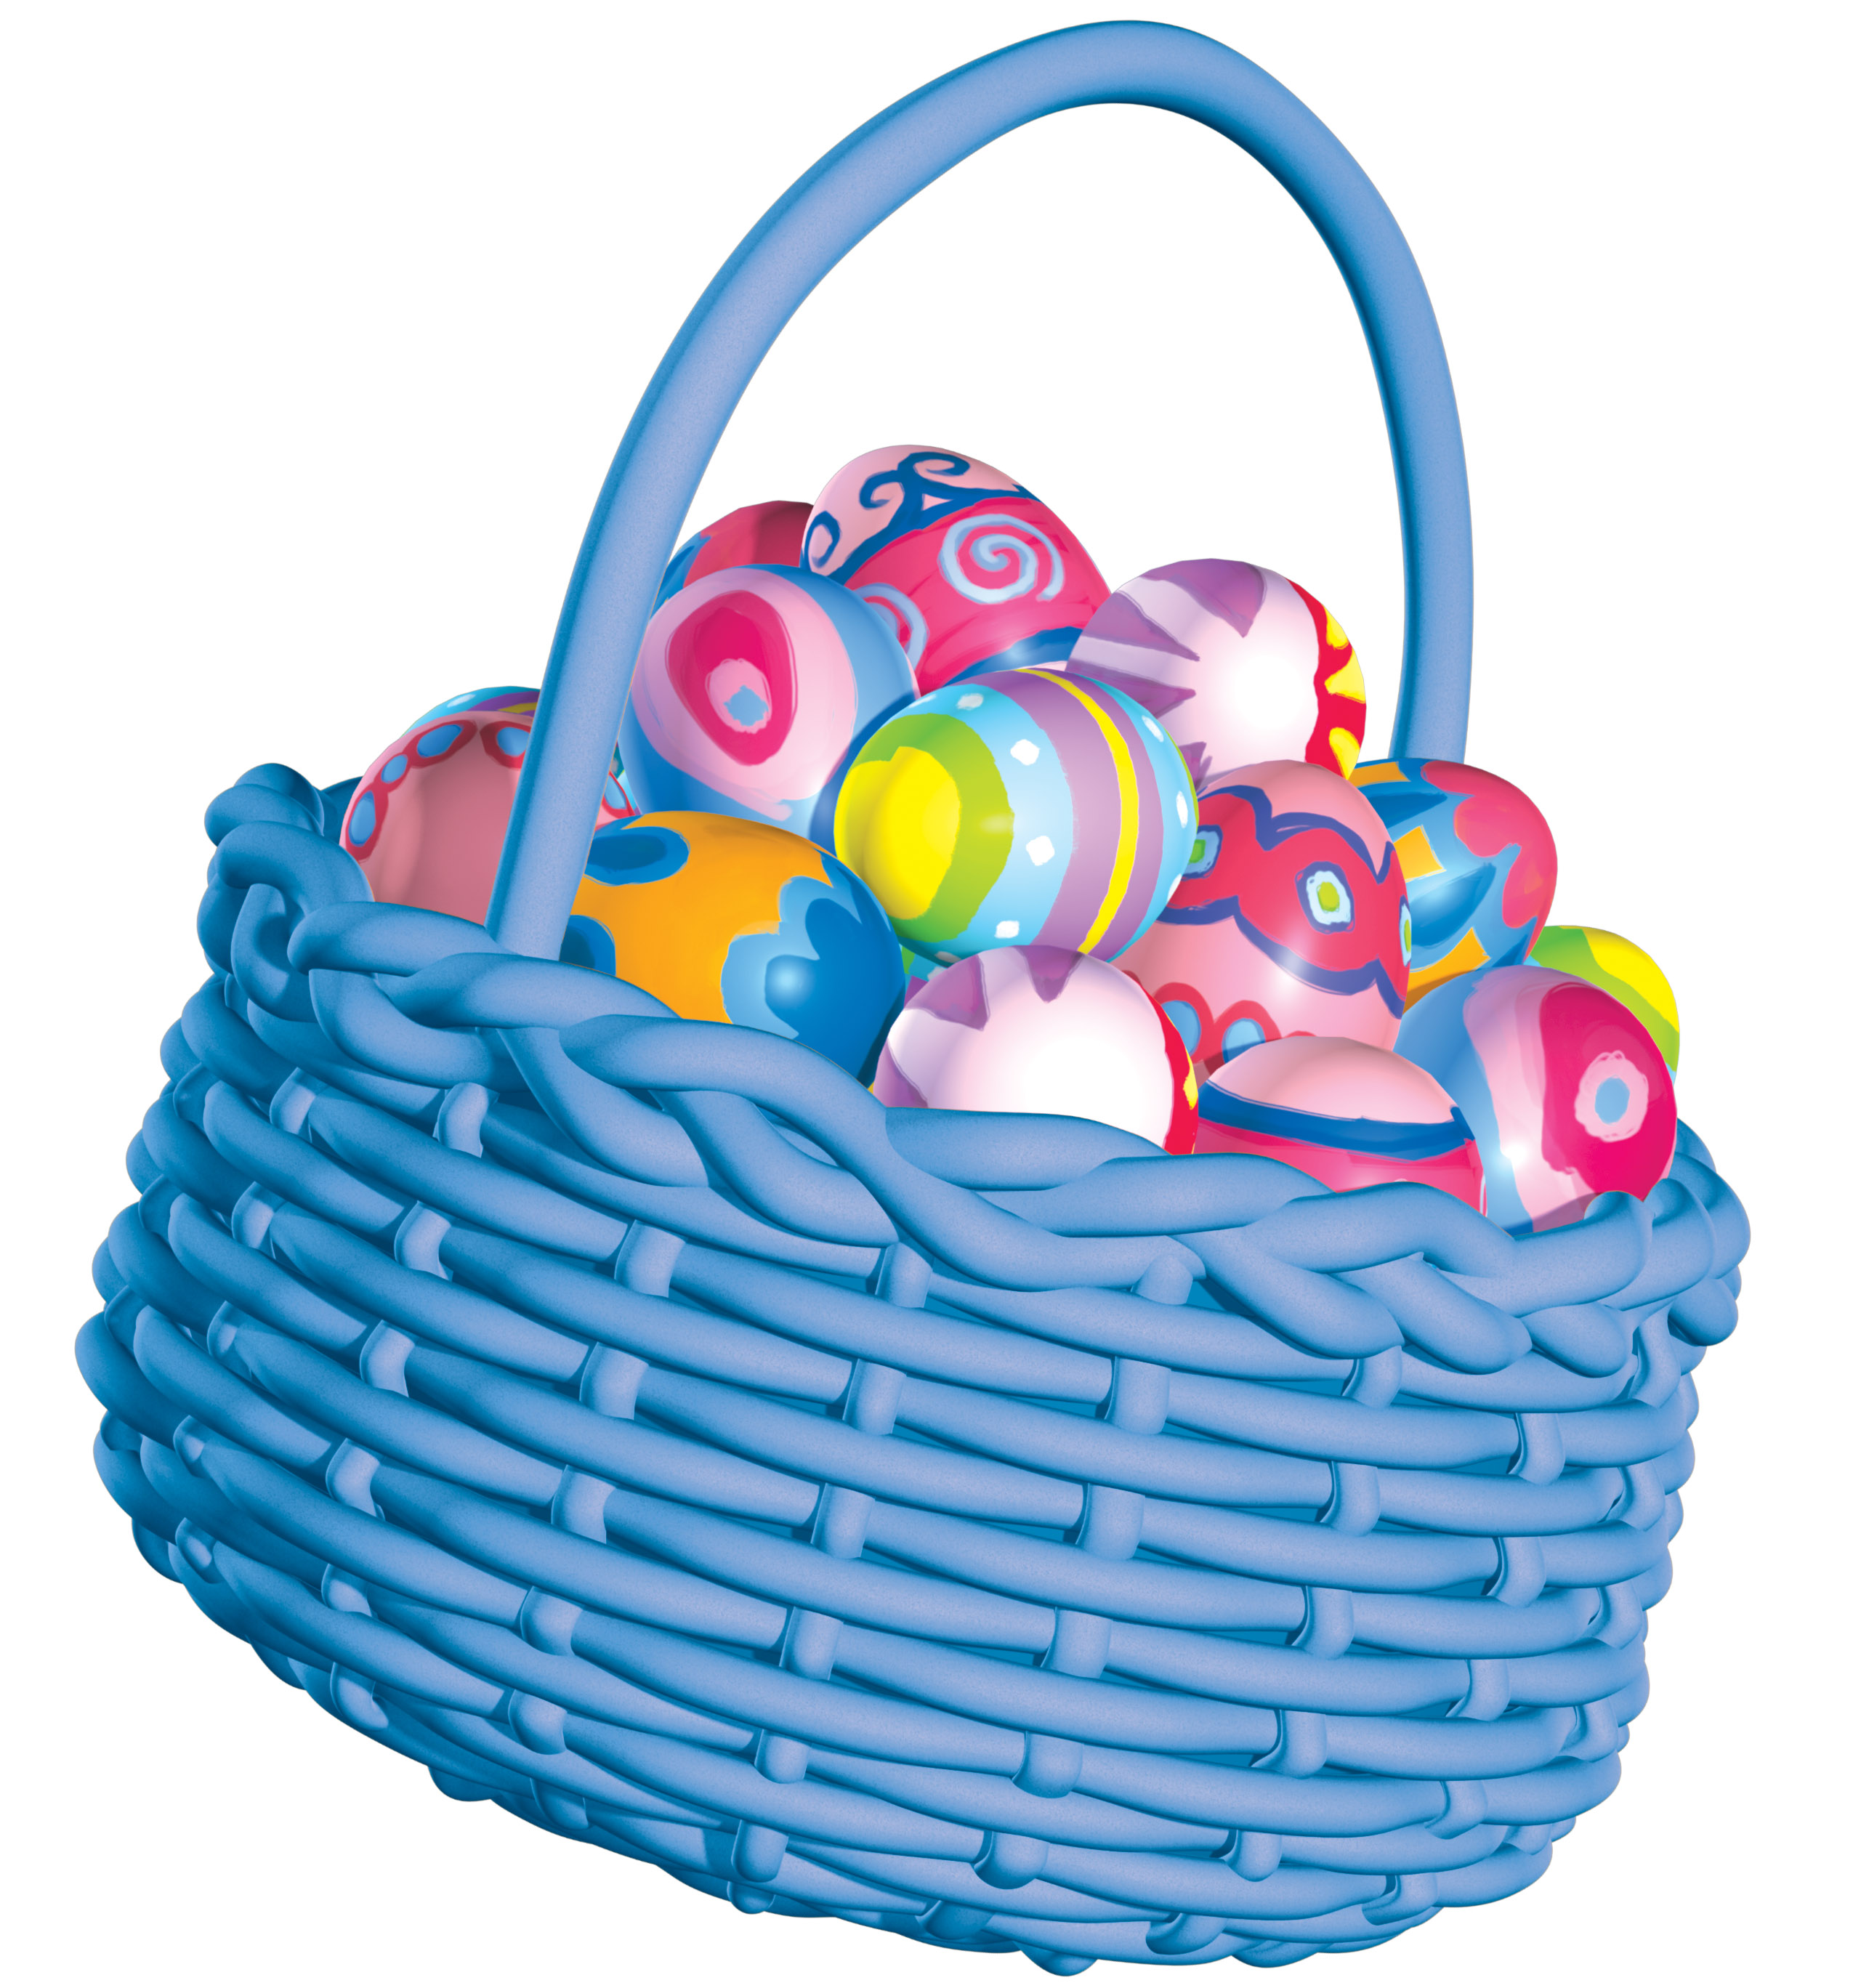 Easter Egg Basket - Clipart library - Clipart library